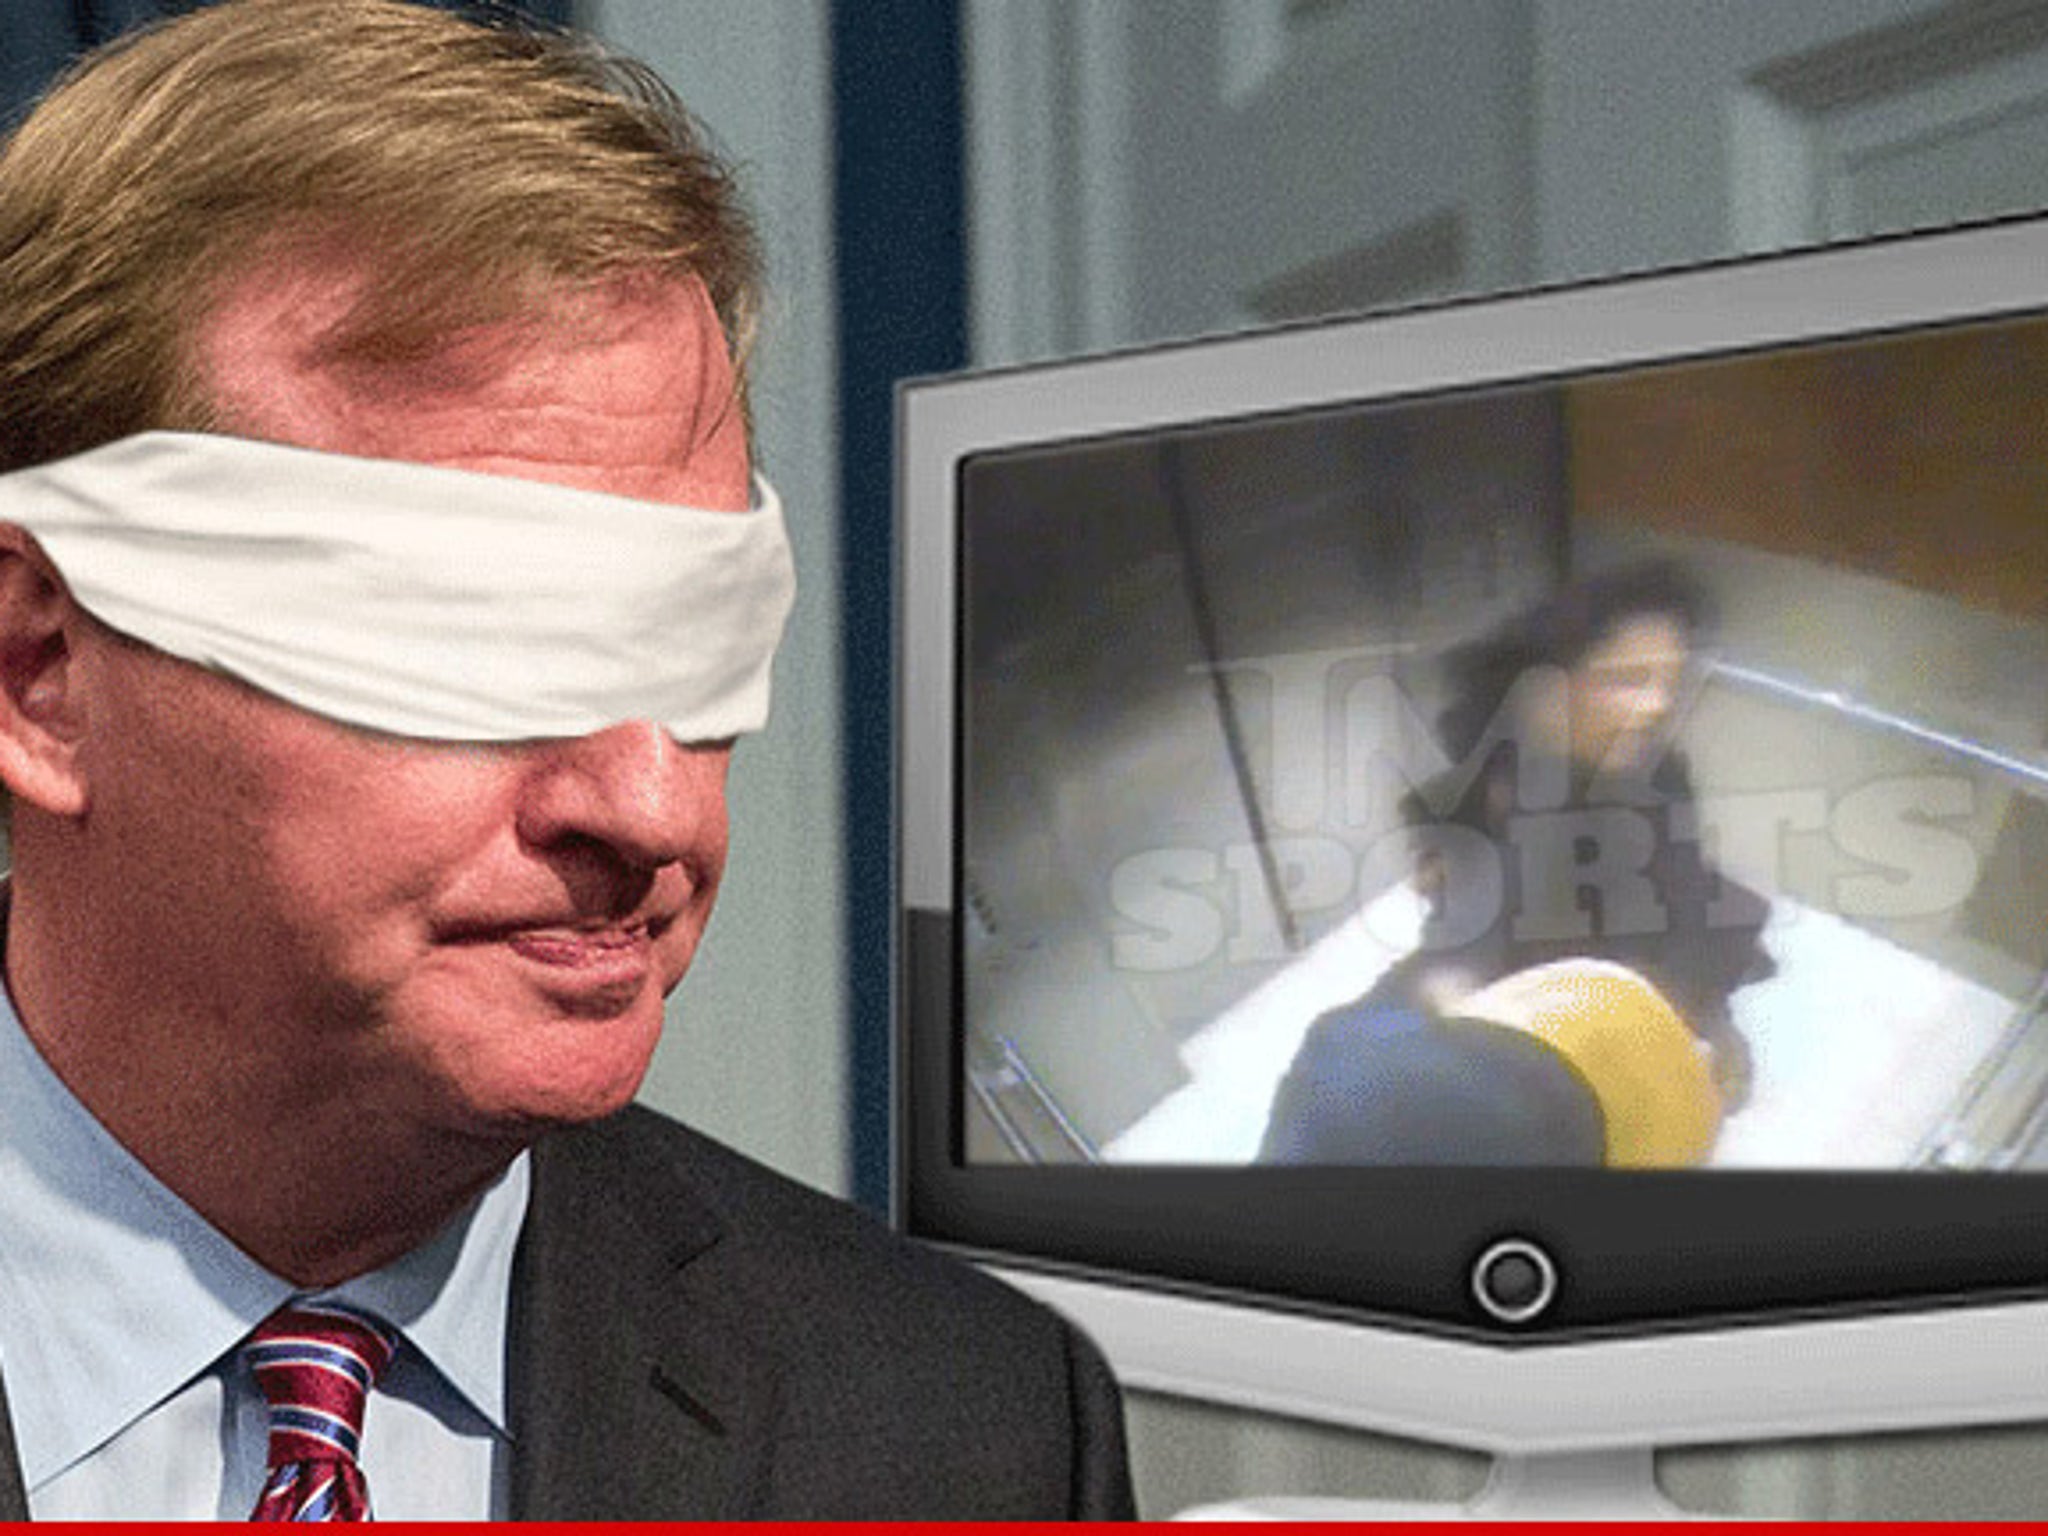 NFL's New Defense on Ray Rice Tape: They're Incompetent